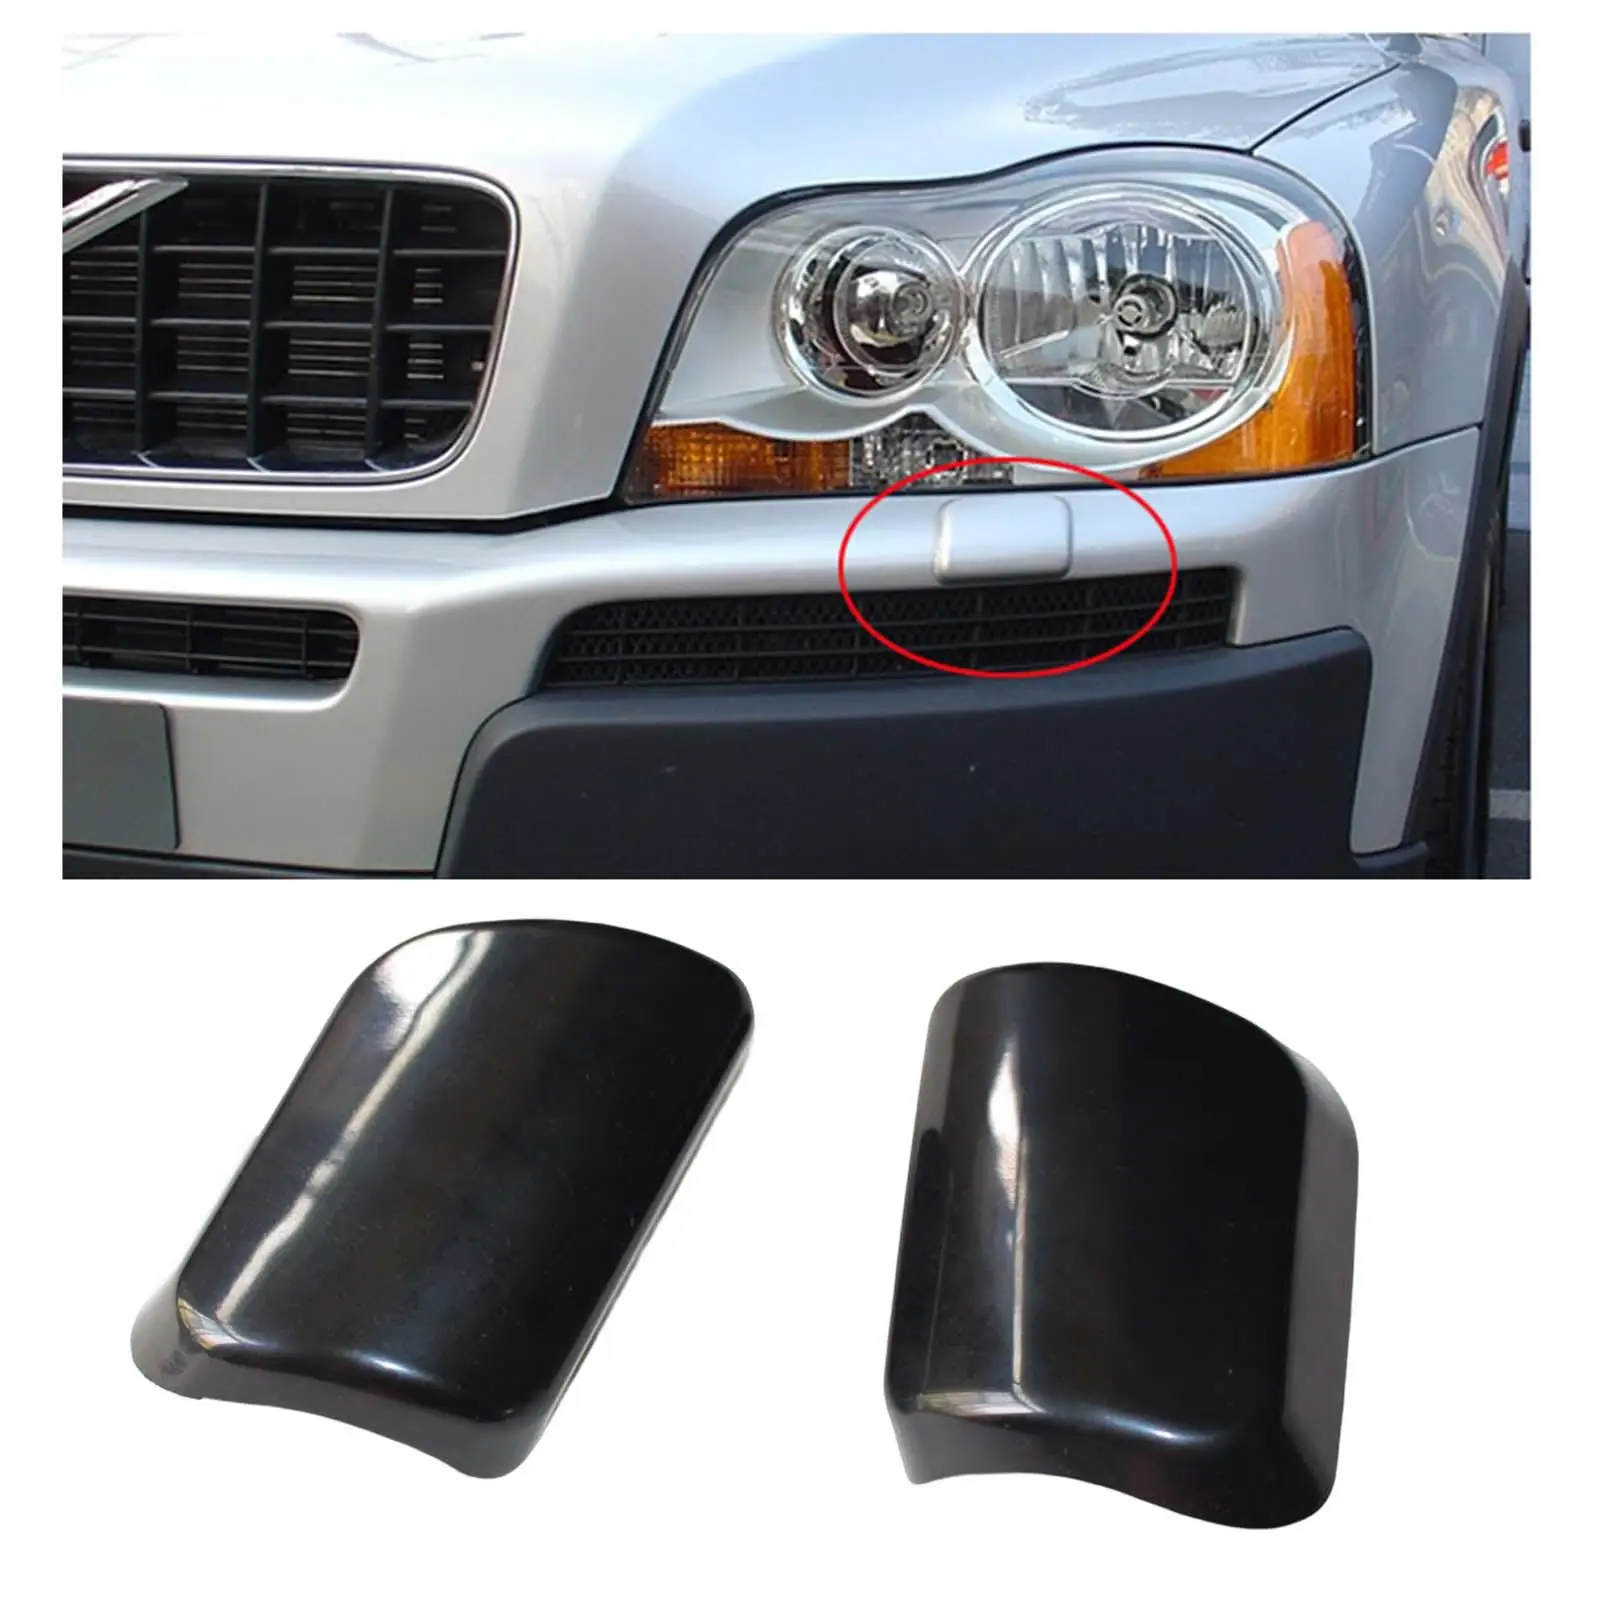 2x Headlight Washer Covers for Volvo  03-06 30698208 30698209